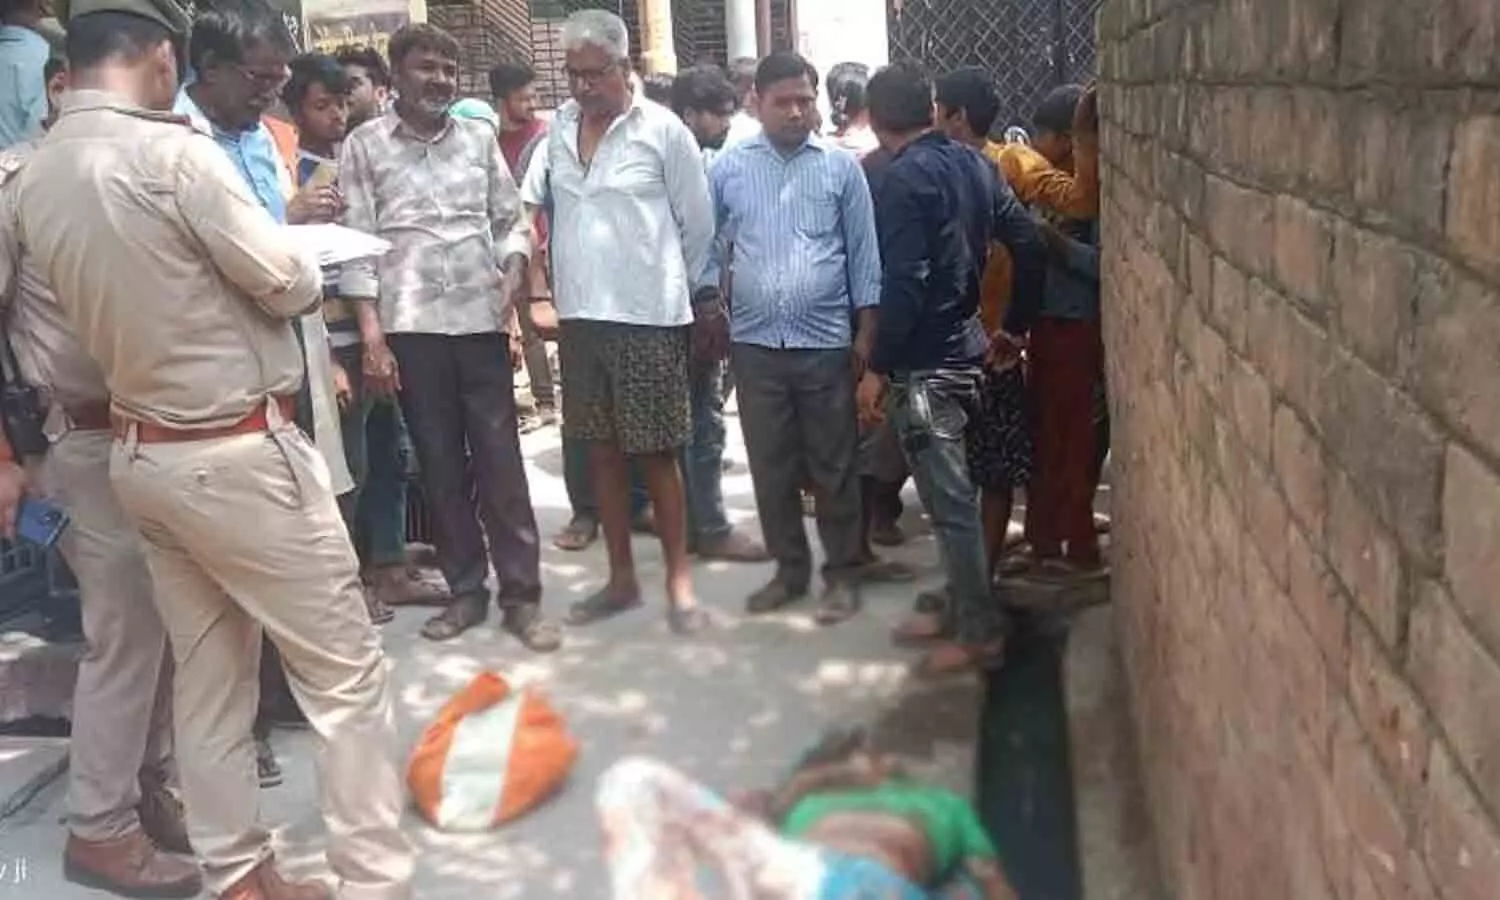 In Fatehpur, Bolero driver escaped after hitting a woman and leaving her injured, died in agony